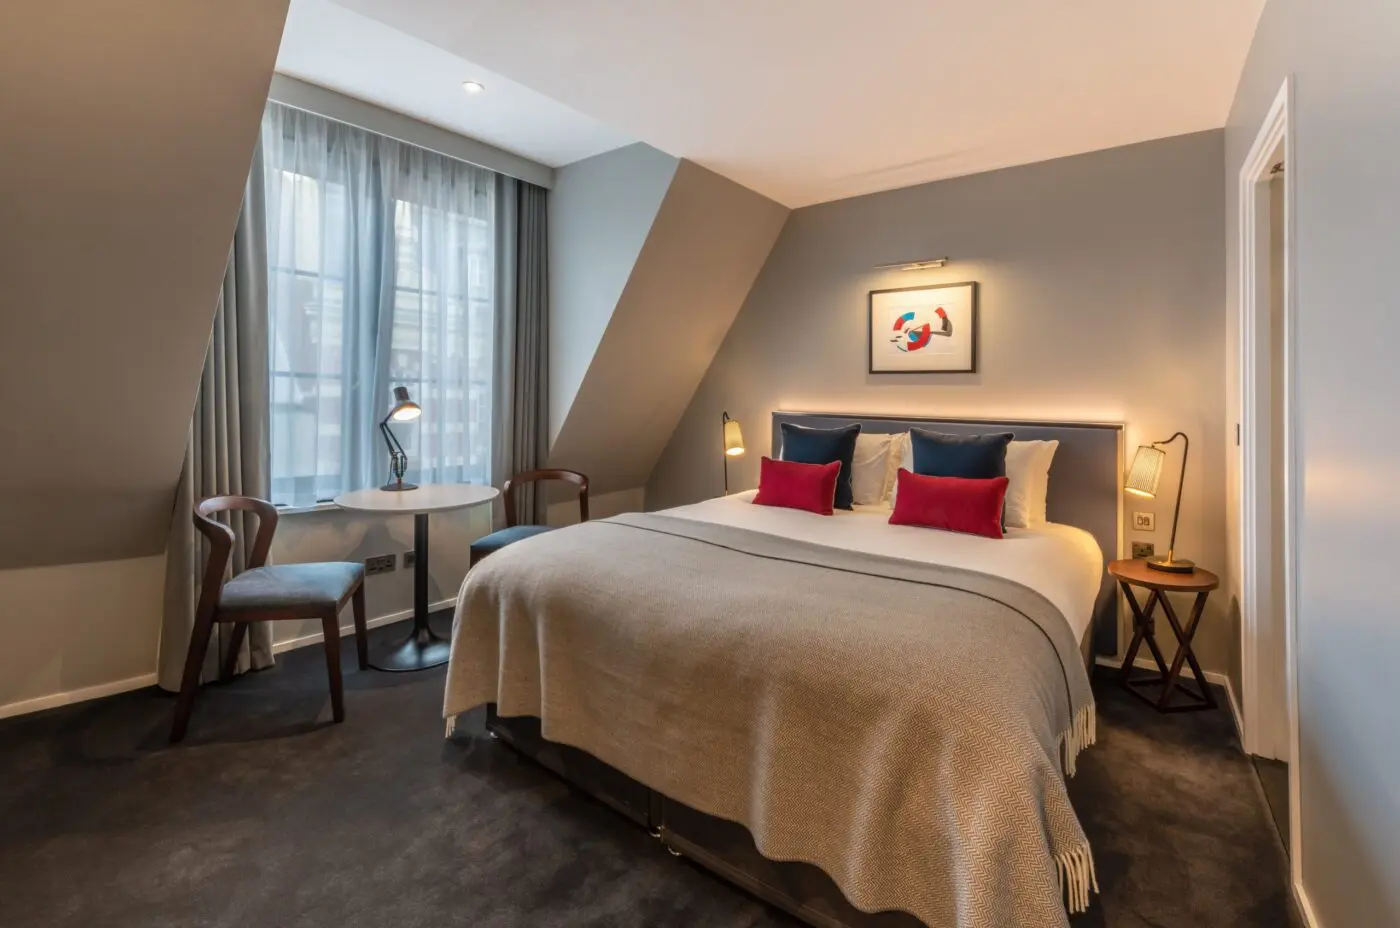 A spacious superior room with a double bed, and dining table, located in Covent Garden.